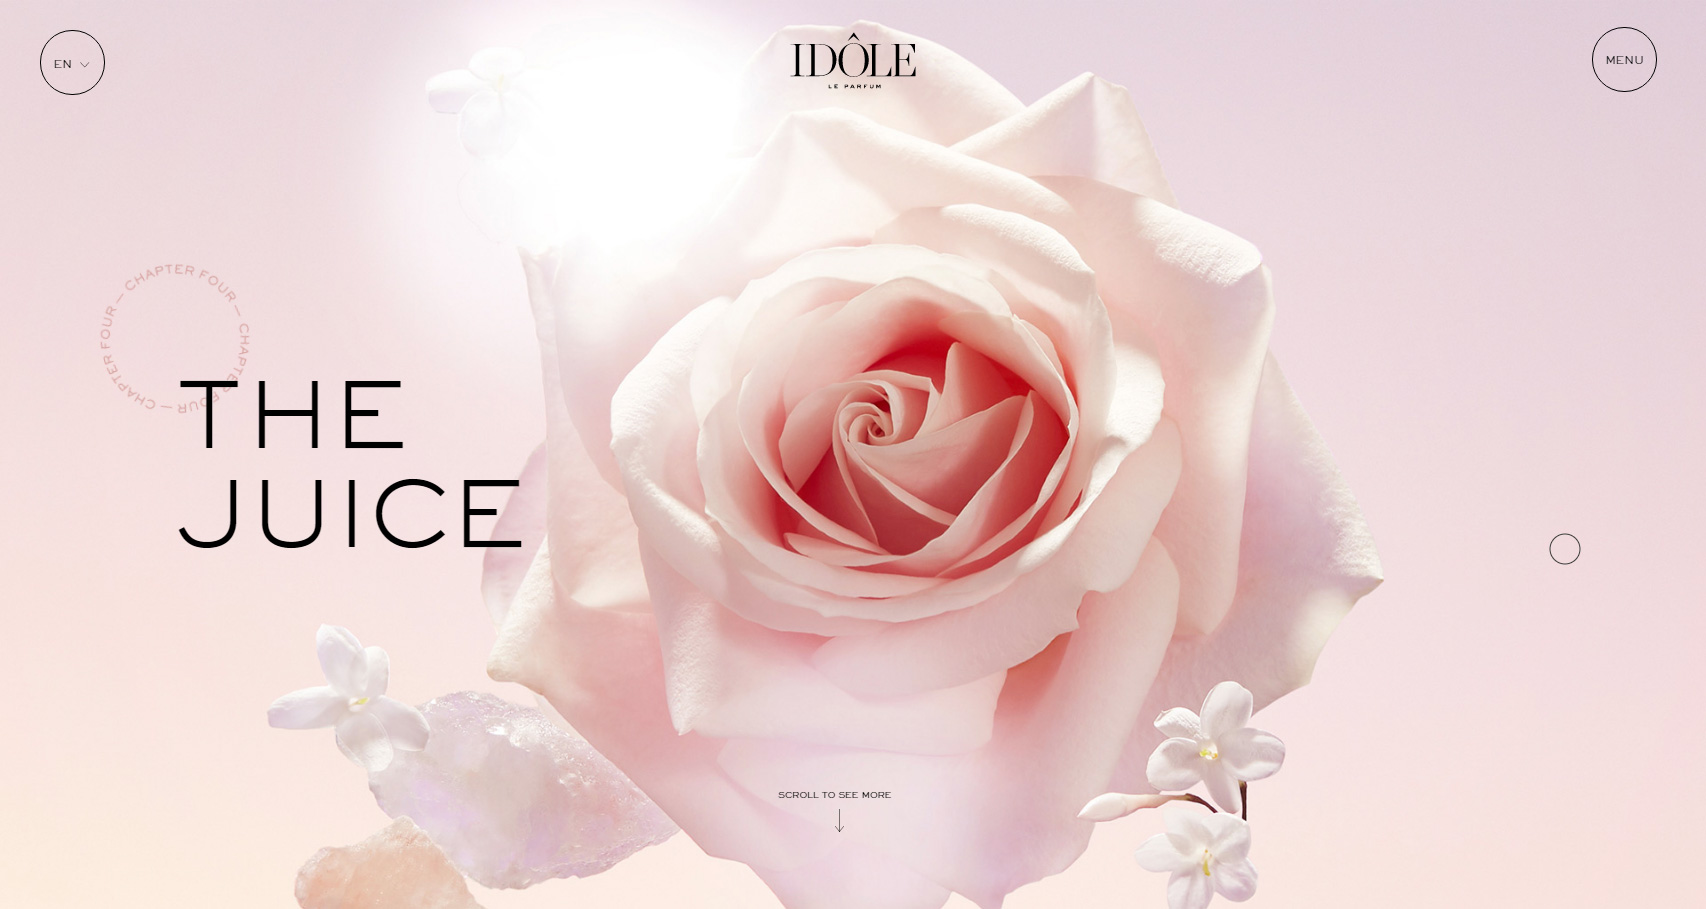 Idôle by Lancôme - Website of the Day